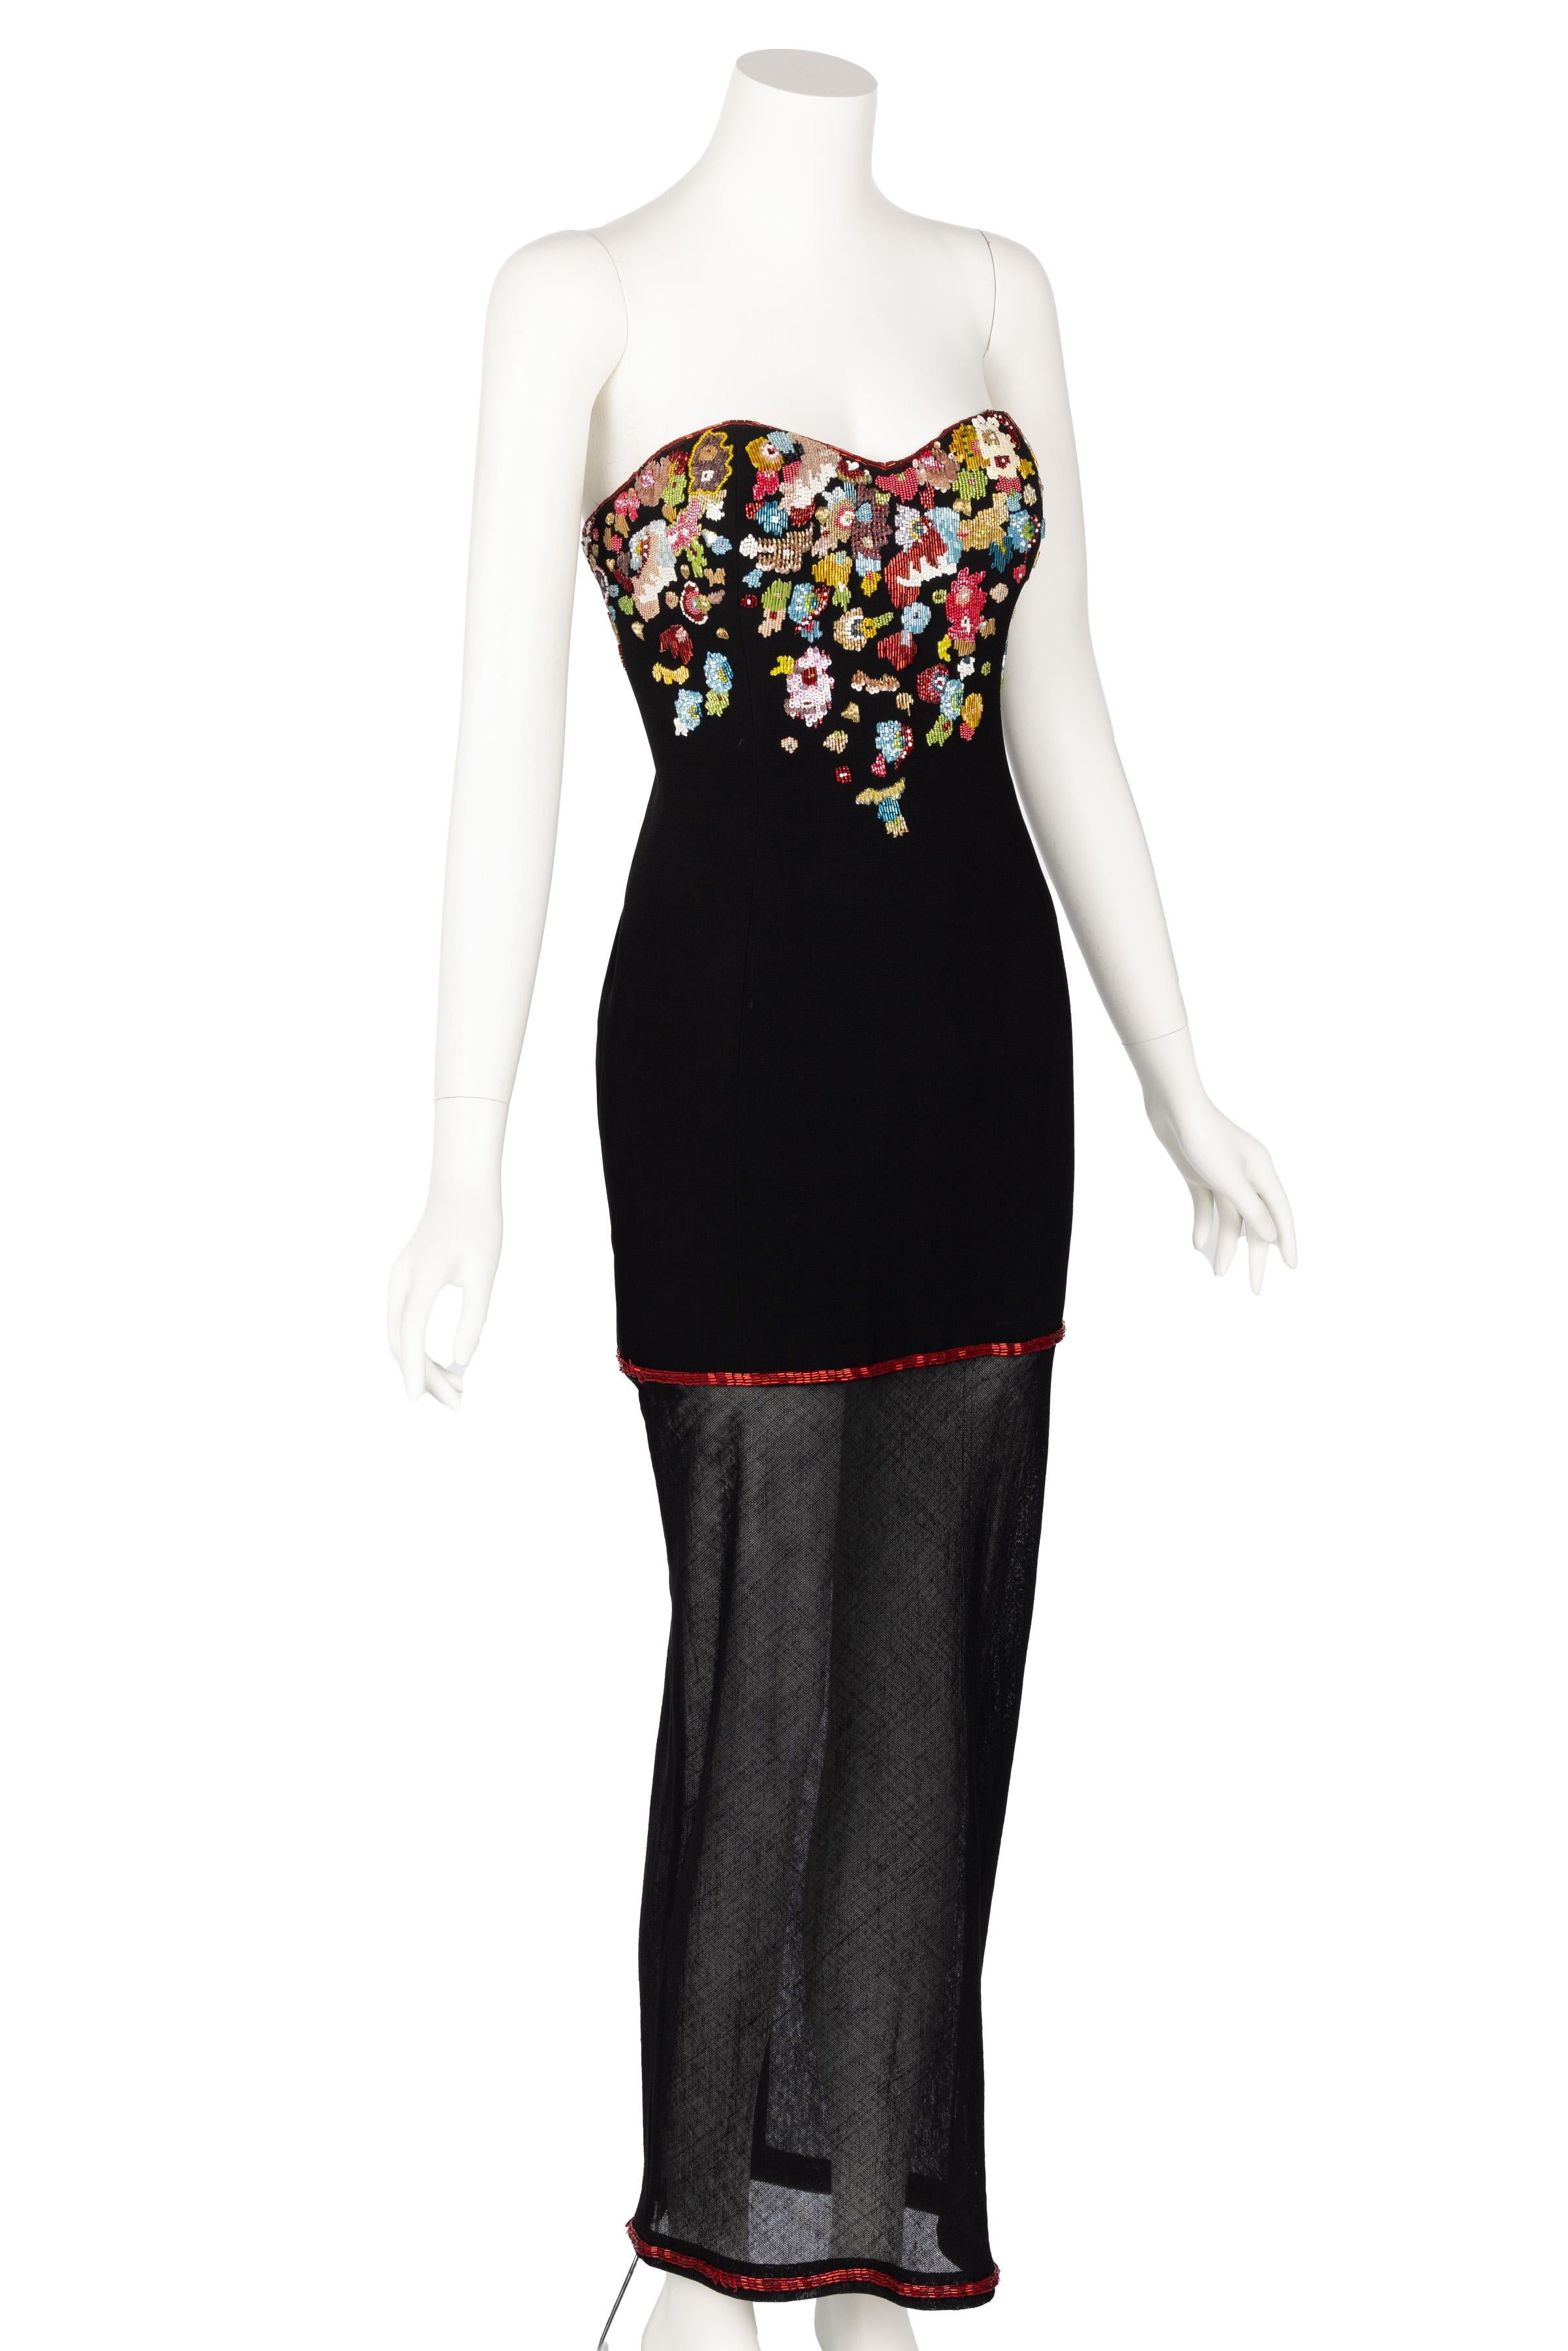 Karl Lagerfeld F/W 1992 Runway Beaded Strapless Sequin Dress In Excellent Condition For Sale In Boca Raton, FL